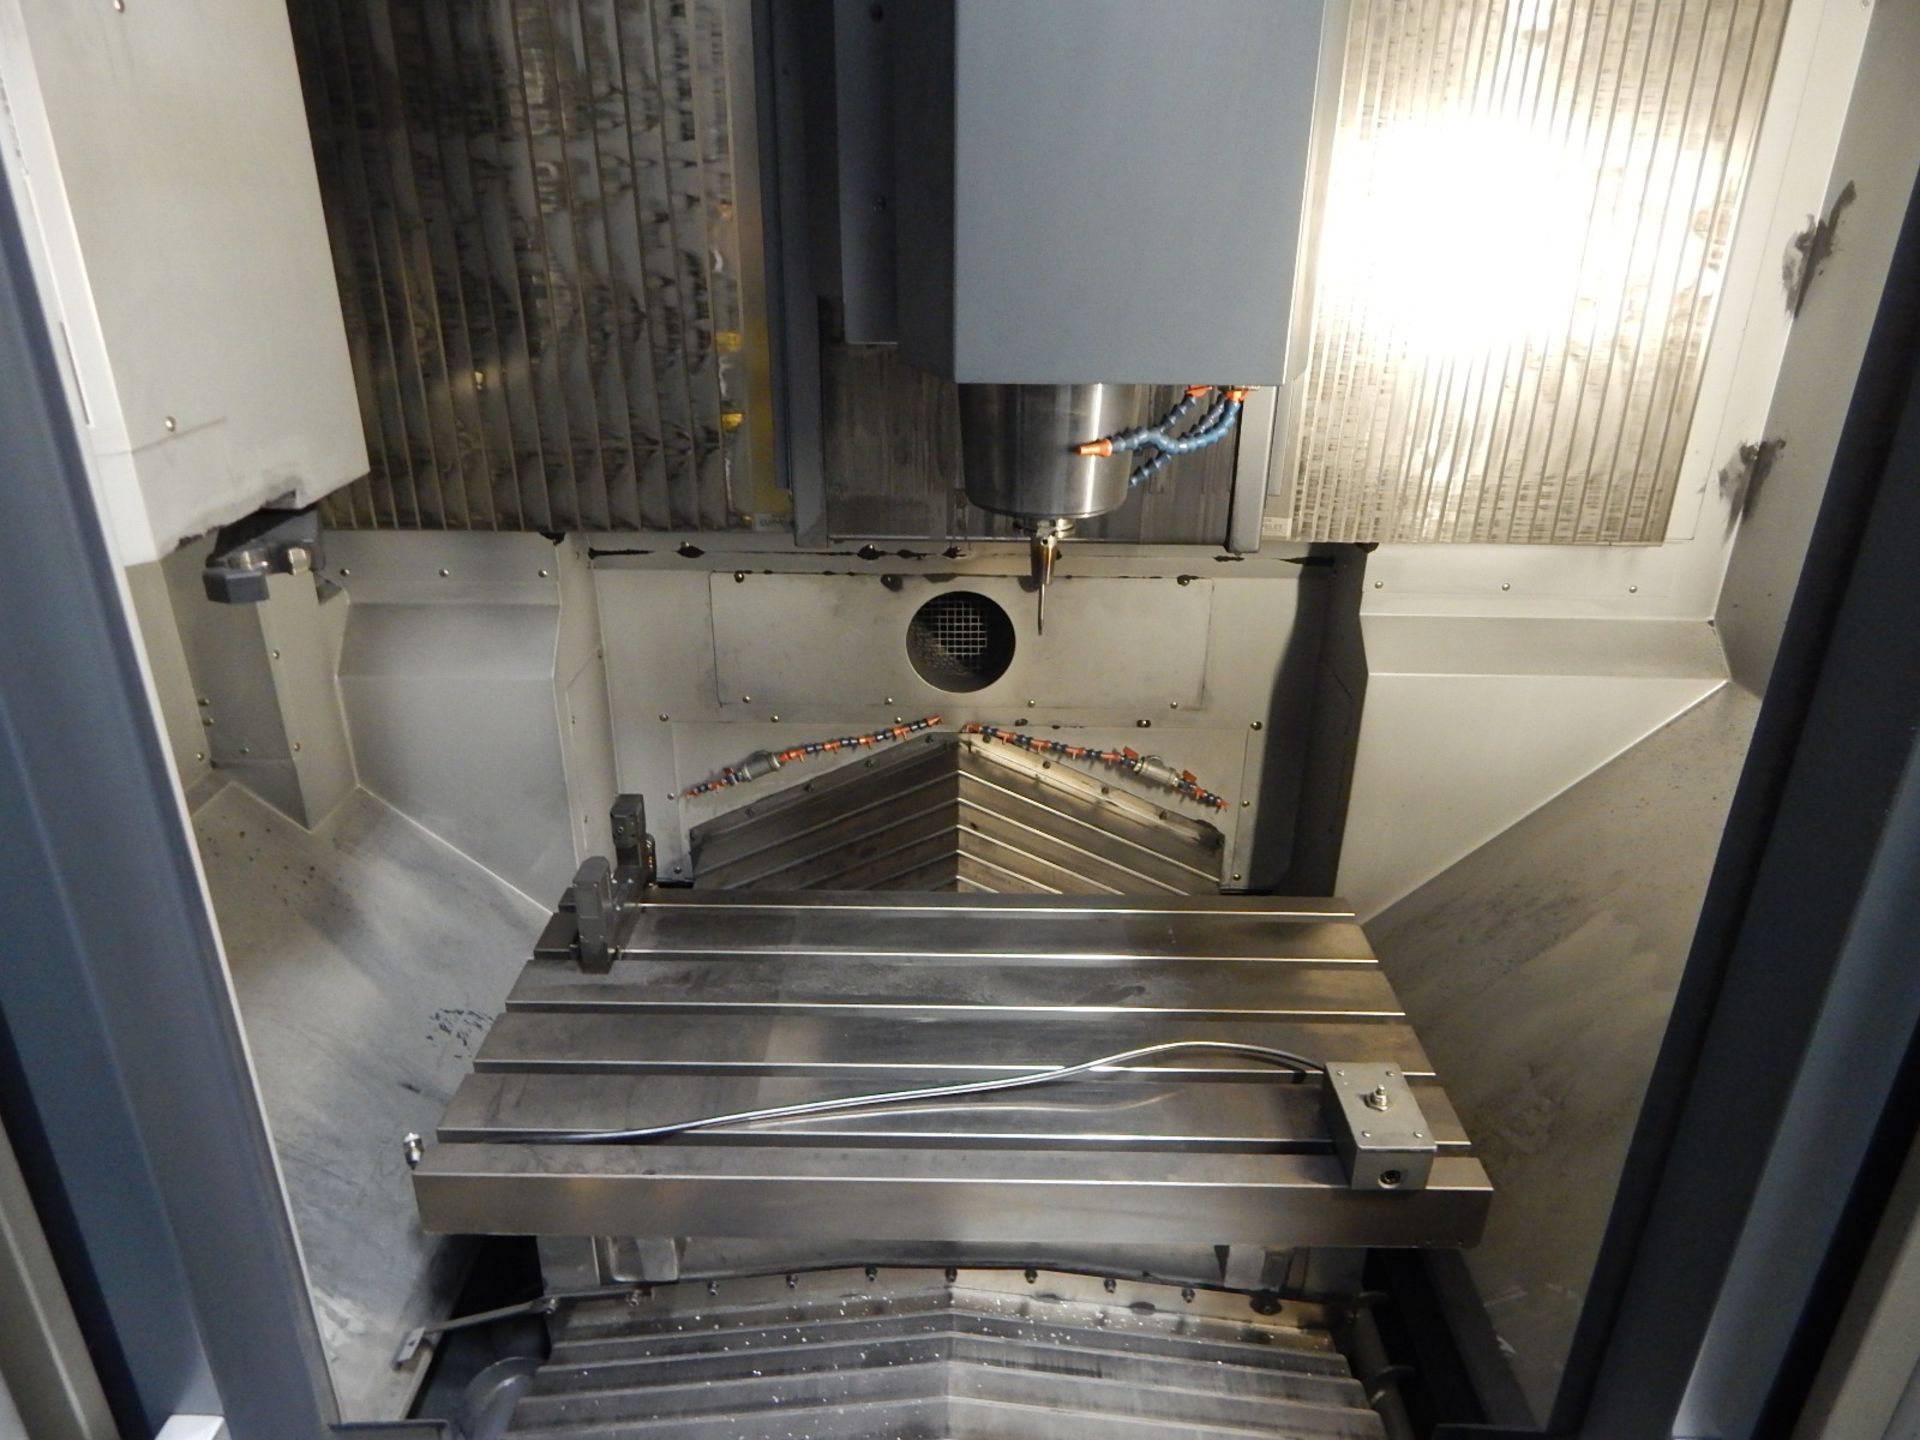 MAKINO (2014) F5 HIGH SPEED CNC VERTICAL MACHINING CENTER WITH MAKINO PROFESSIONAL 5 CNC CONTROL, - Image 6 of 7